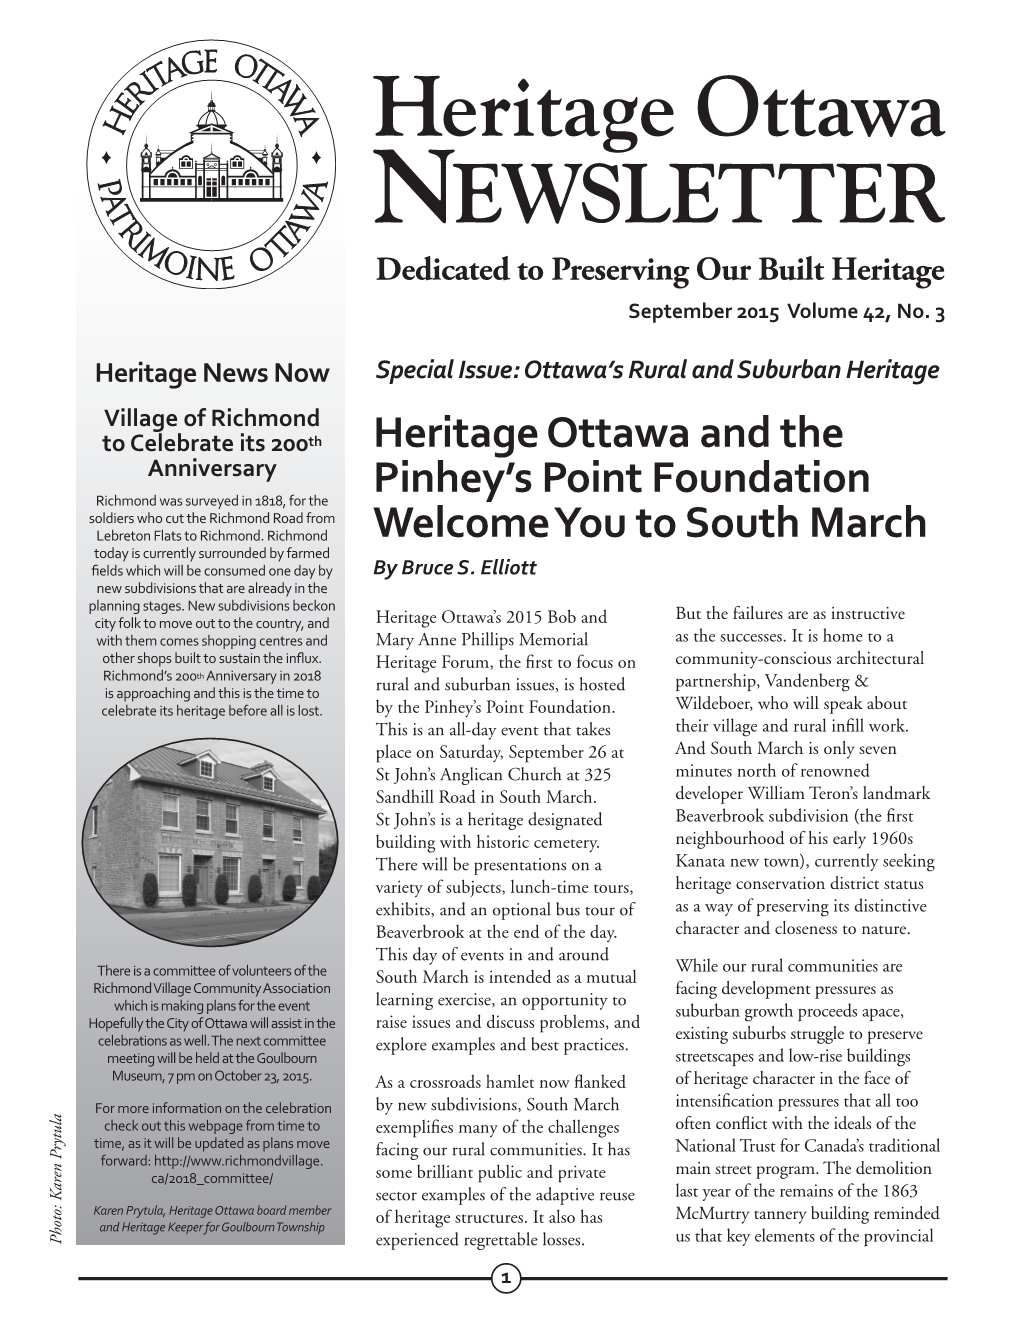 Heritage Ottawa and the Pinhey's Point Foundation Welcome You To